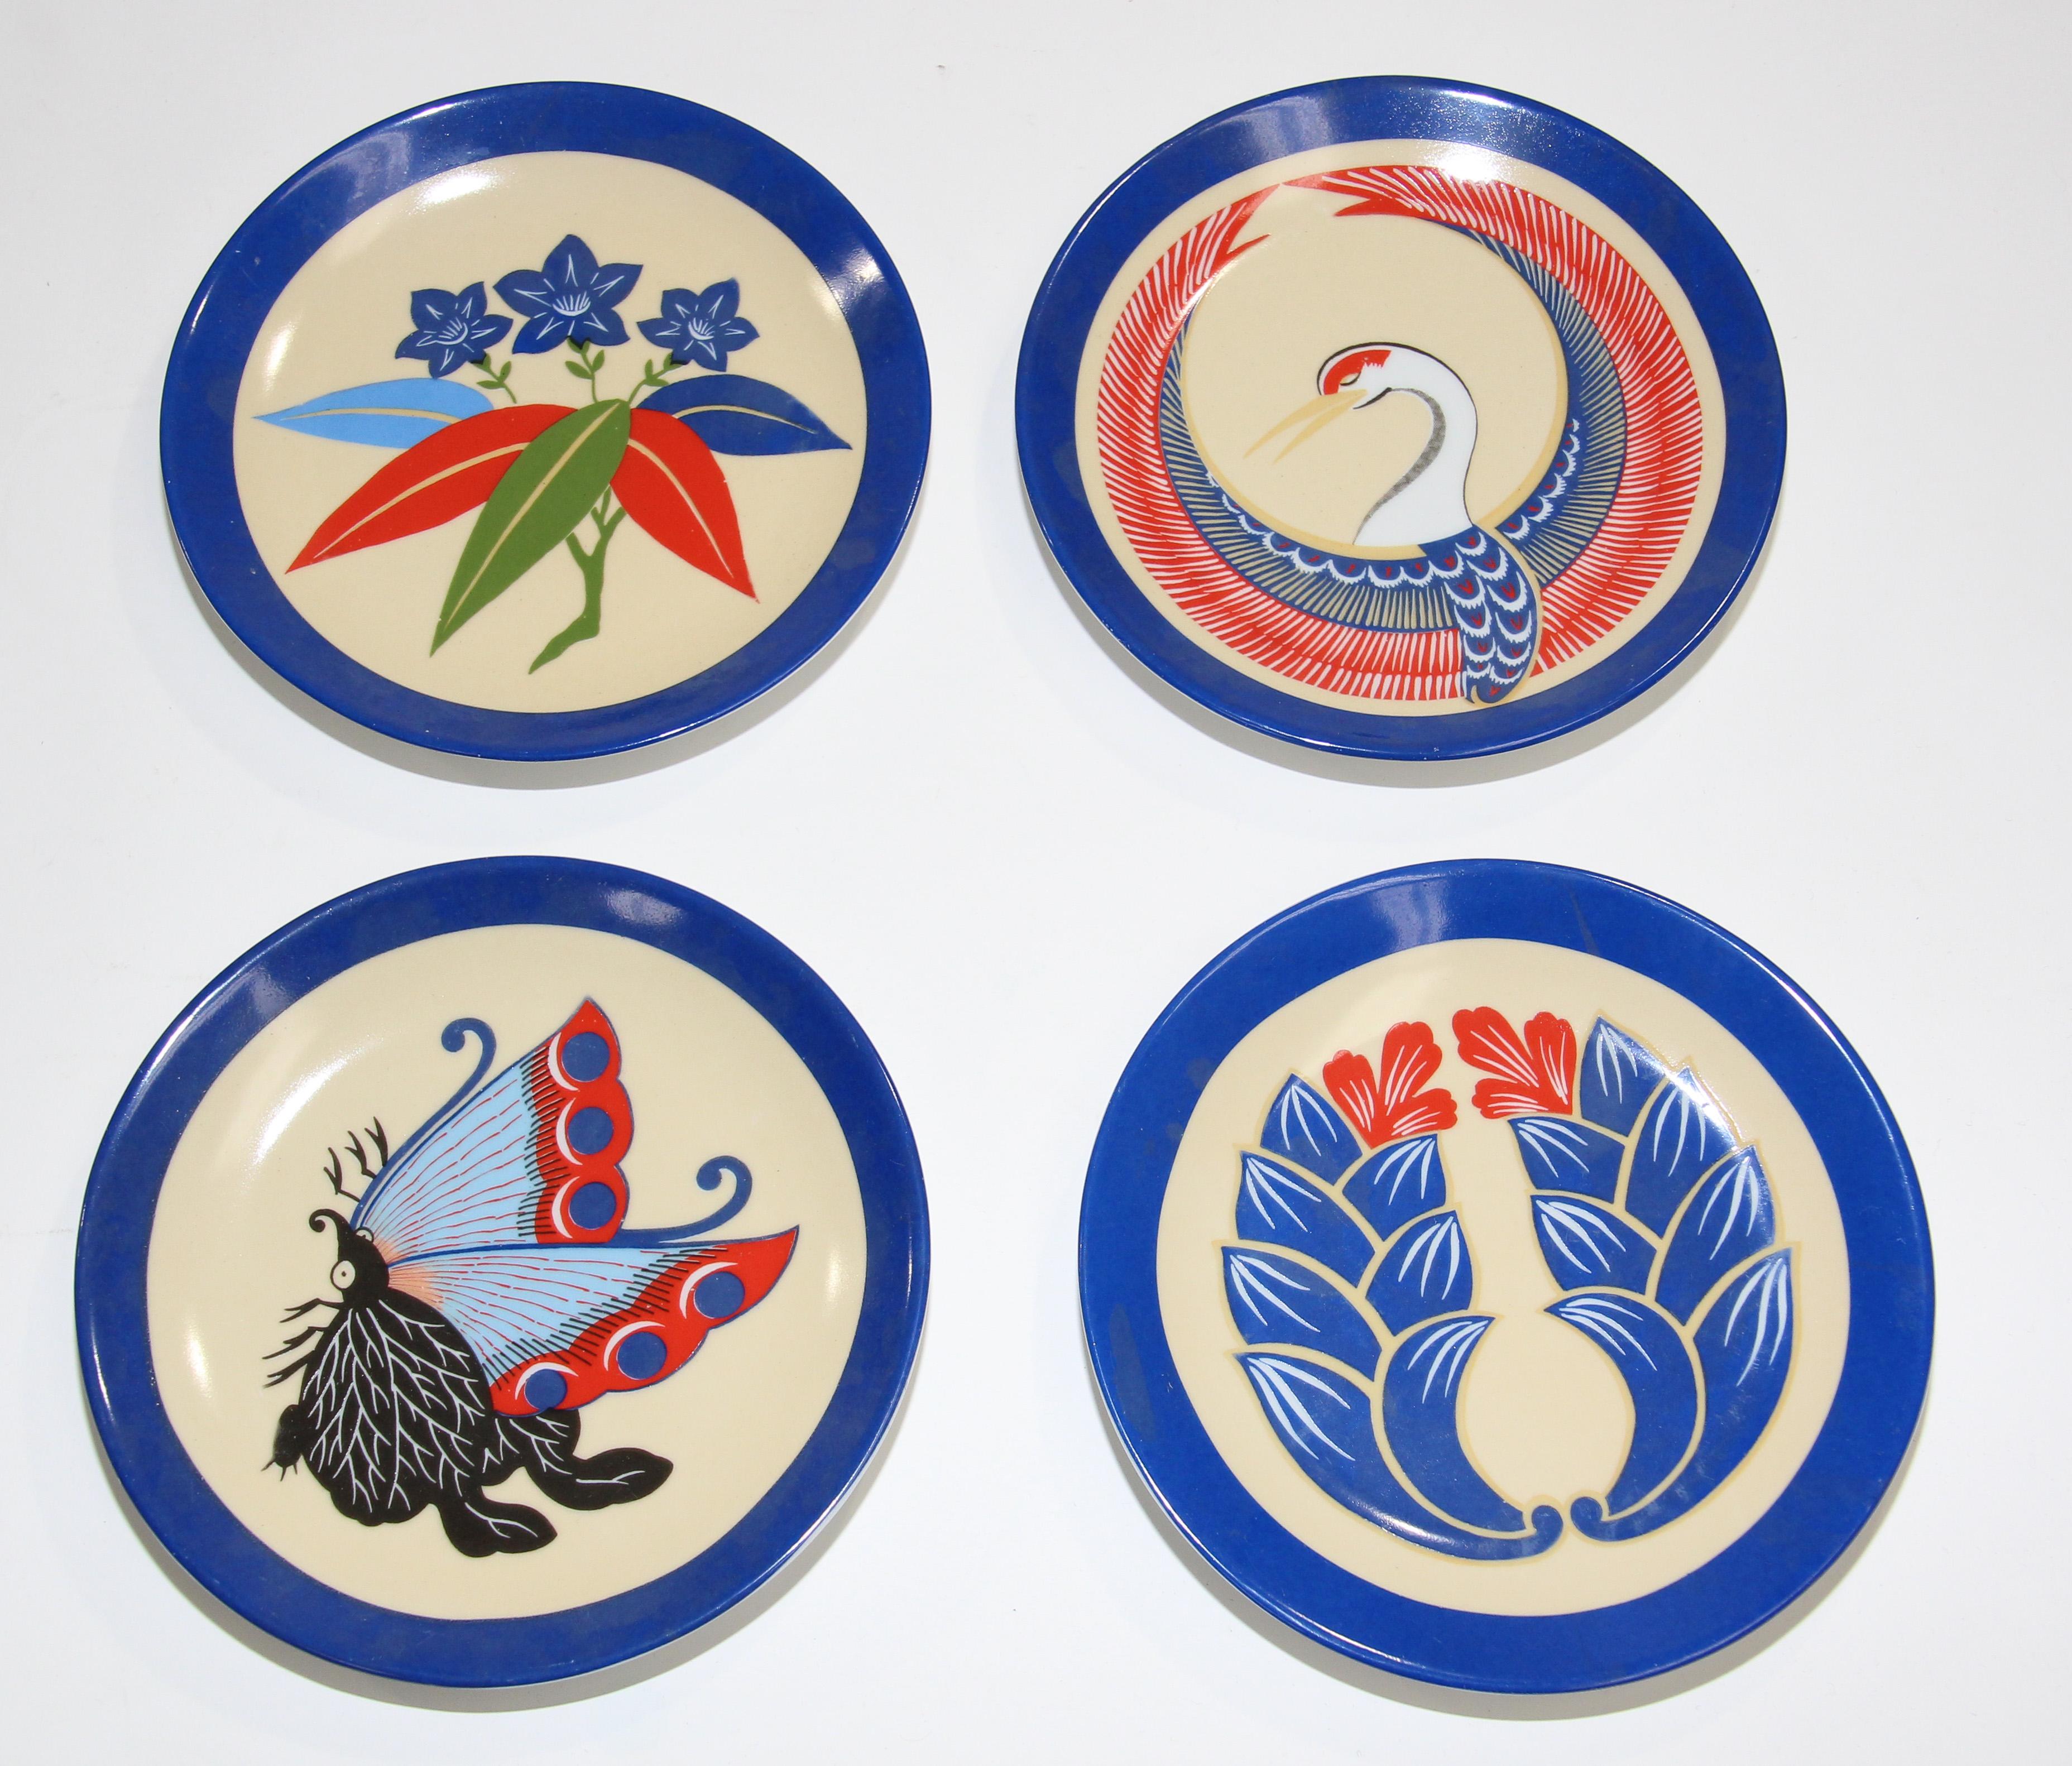 Set of four Japanese Art plates recreated by Philippe Deshoulieres, Lourioux, France for the Museum of Fine Arts- Boston. 
Philippe Deshoulieres Lourioux Limoges Plates Boston MFA Japanese No Theatre Design.
The plates are adaptations from 18th